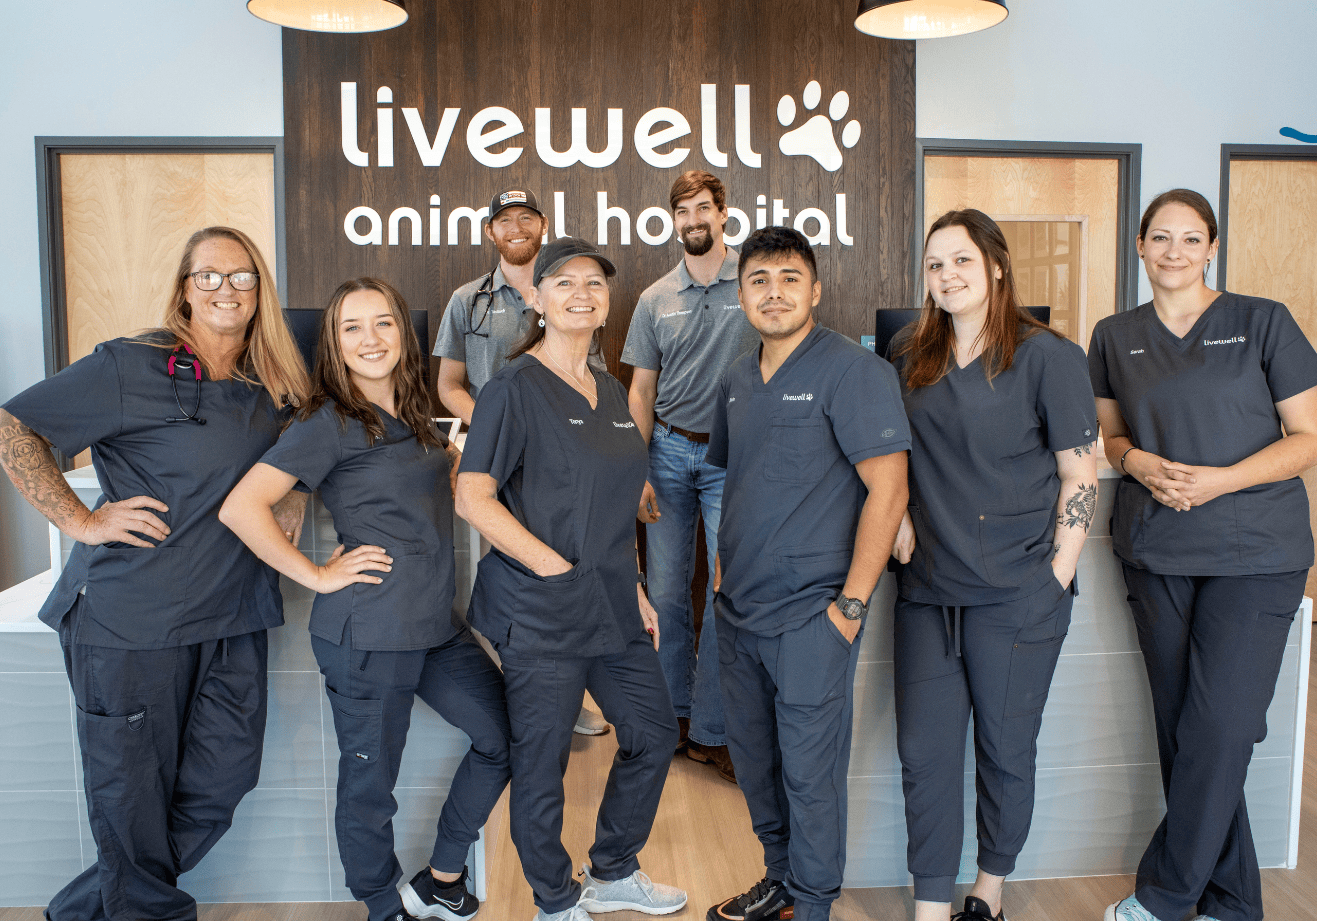 Entire staff of Livewell Animal Hospital of Little Elm gathered around receptionist area posing